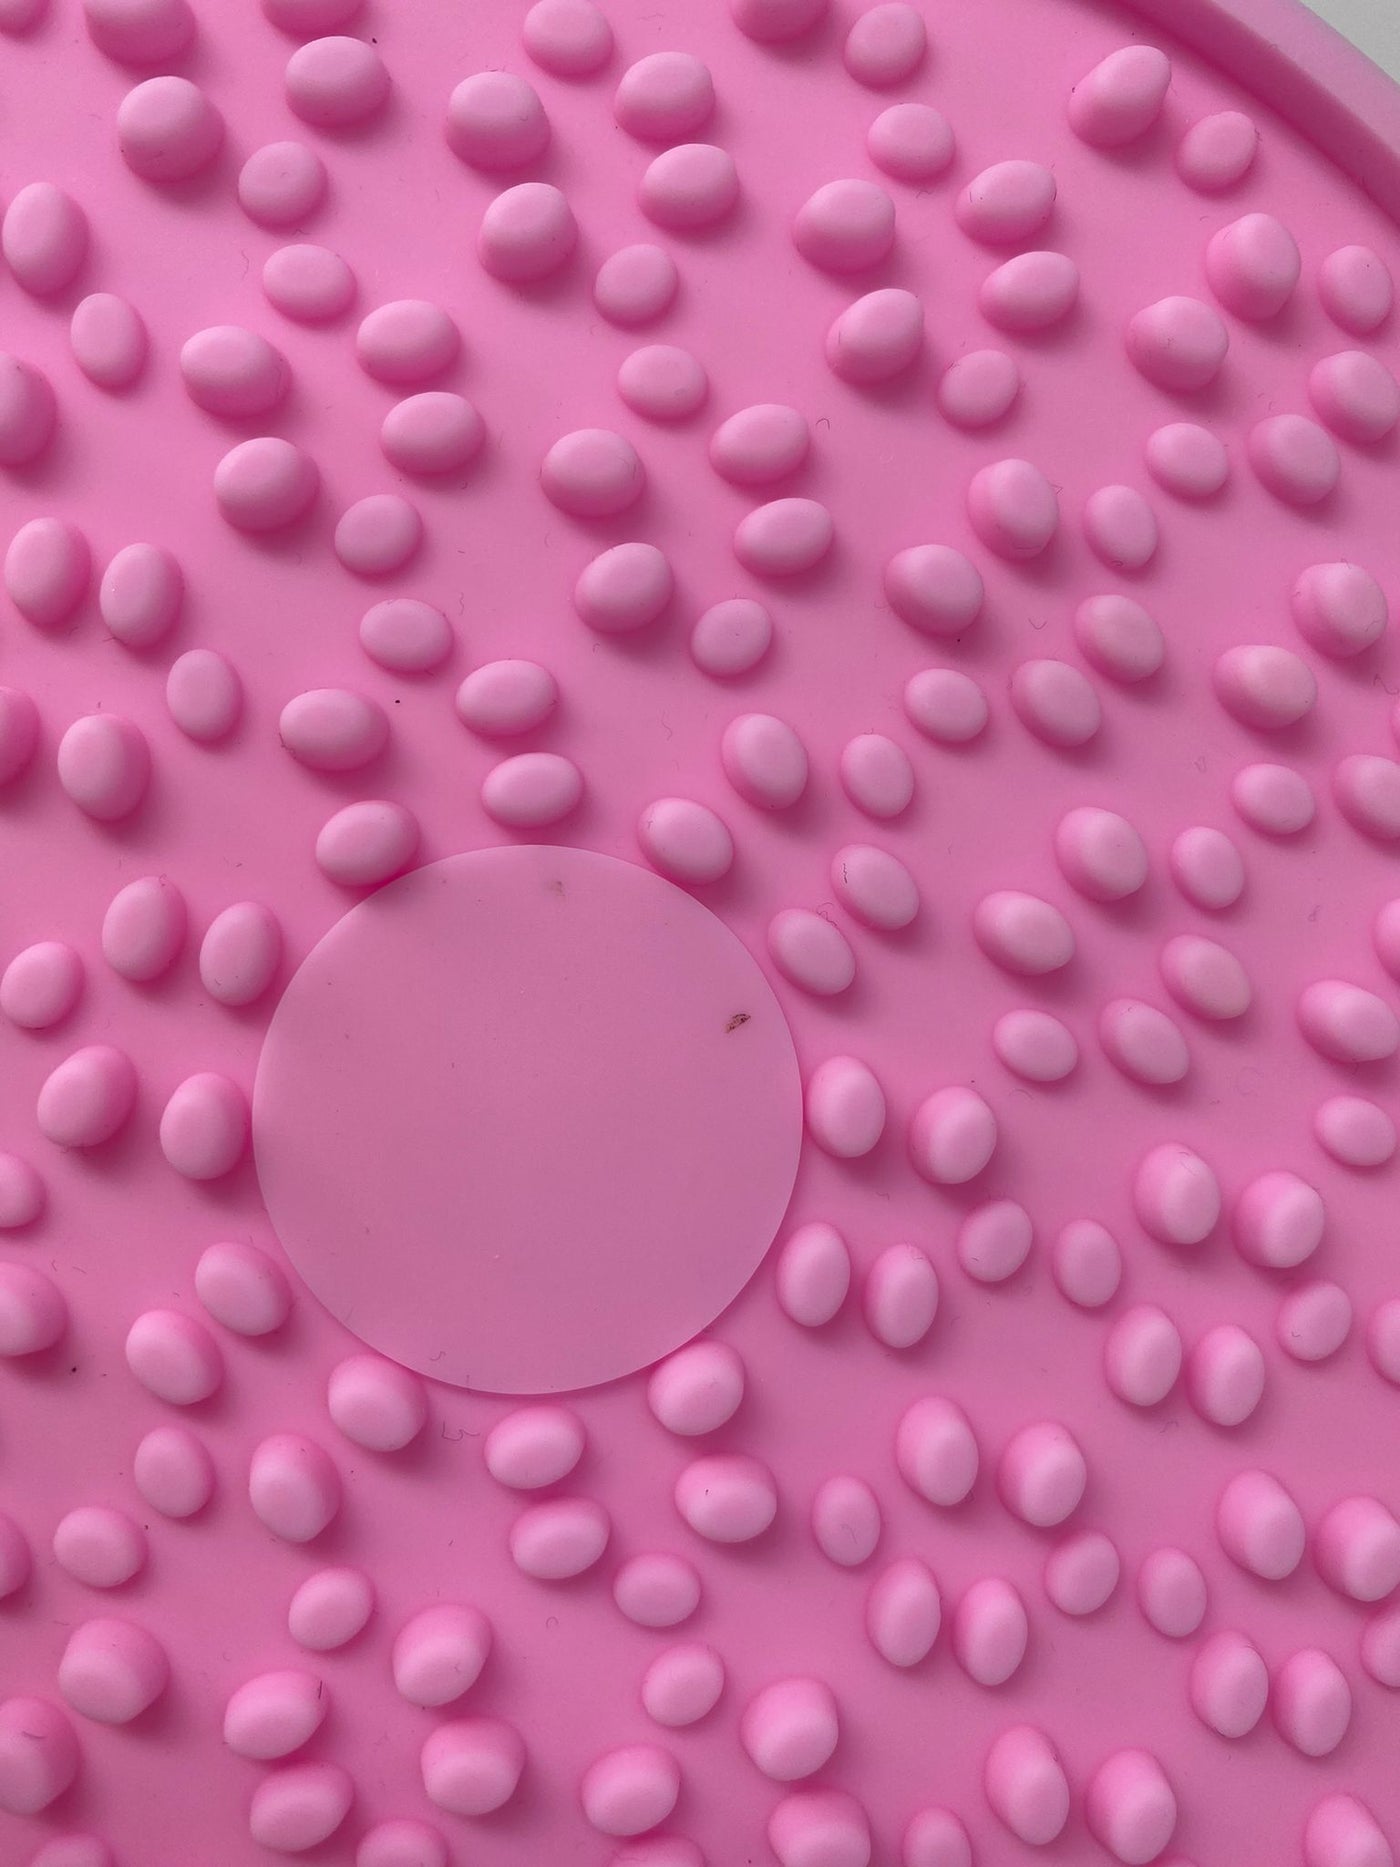 Outlet - PINK MUNCHIE MAT WITH SUCTION CUPS - 0067